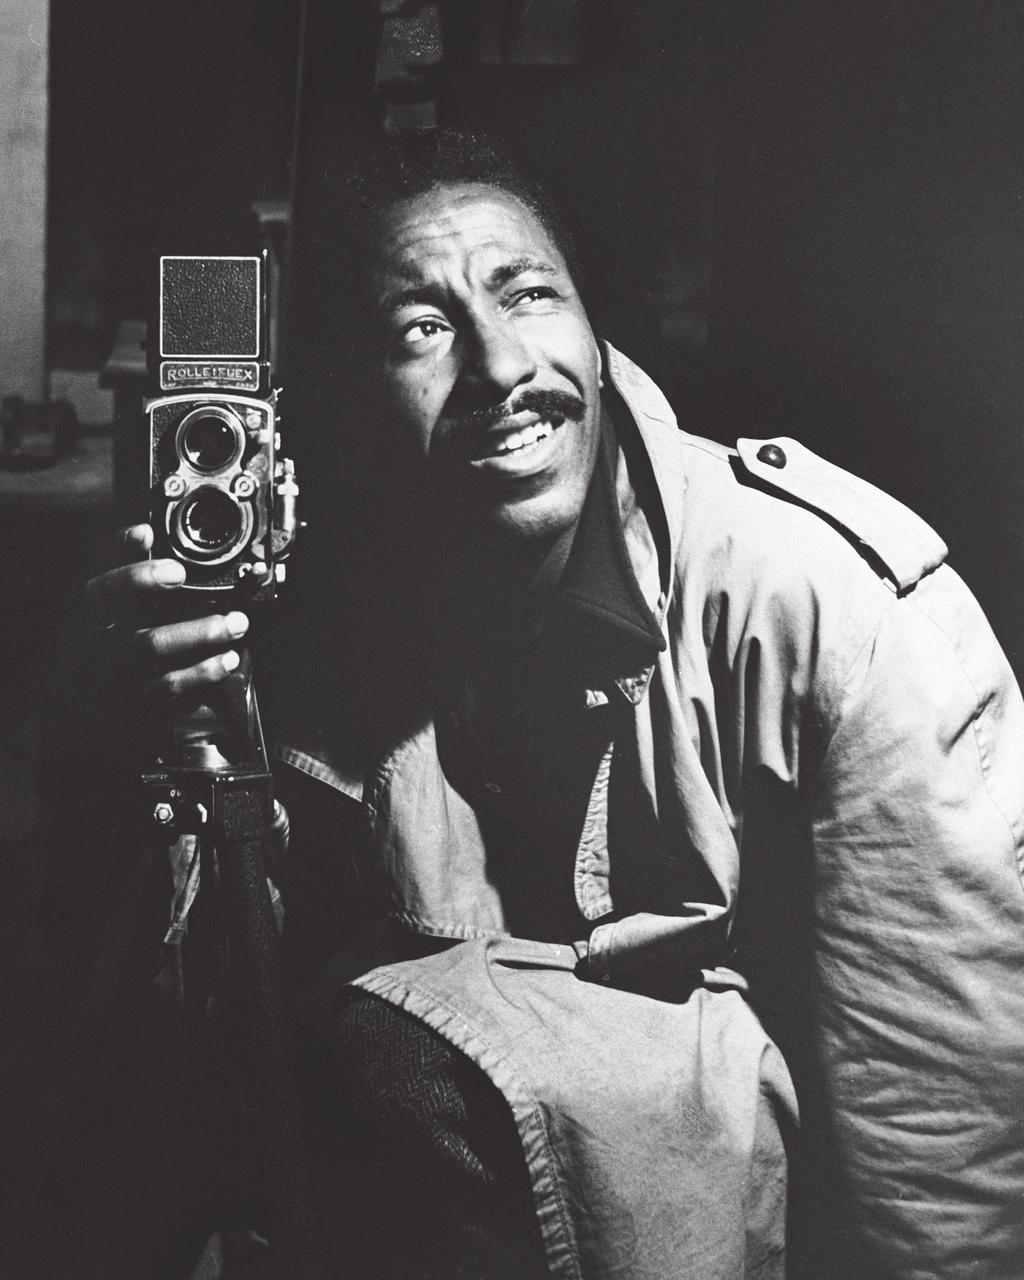 1 1 1 Gordon Parks 1-0 The son of a farmer in Fort Scott, Kansas, Gordon Parks defied racism and his own impoverished beginnings to become one of the world s great photographers, as well as an